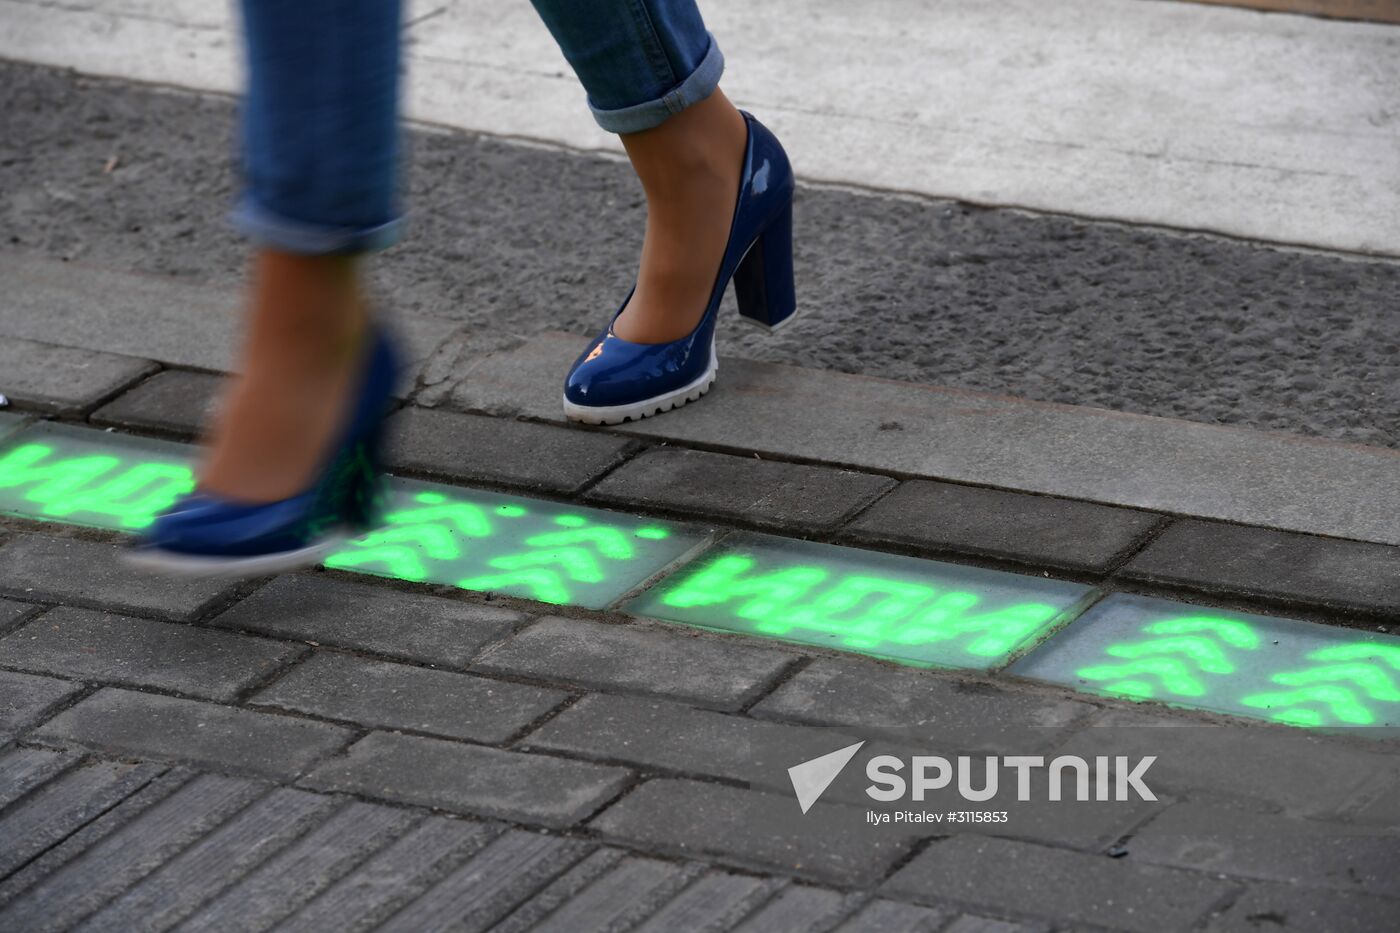 Traffic-lights-under-your-feet project reset